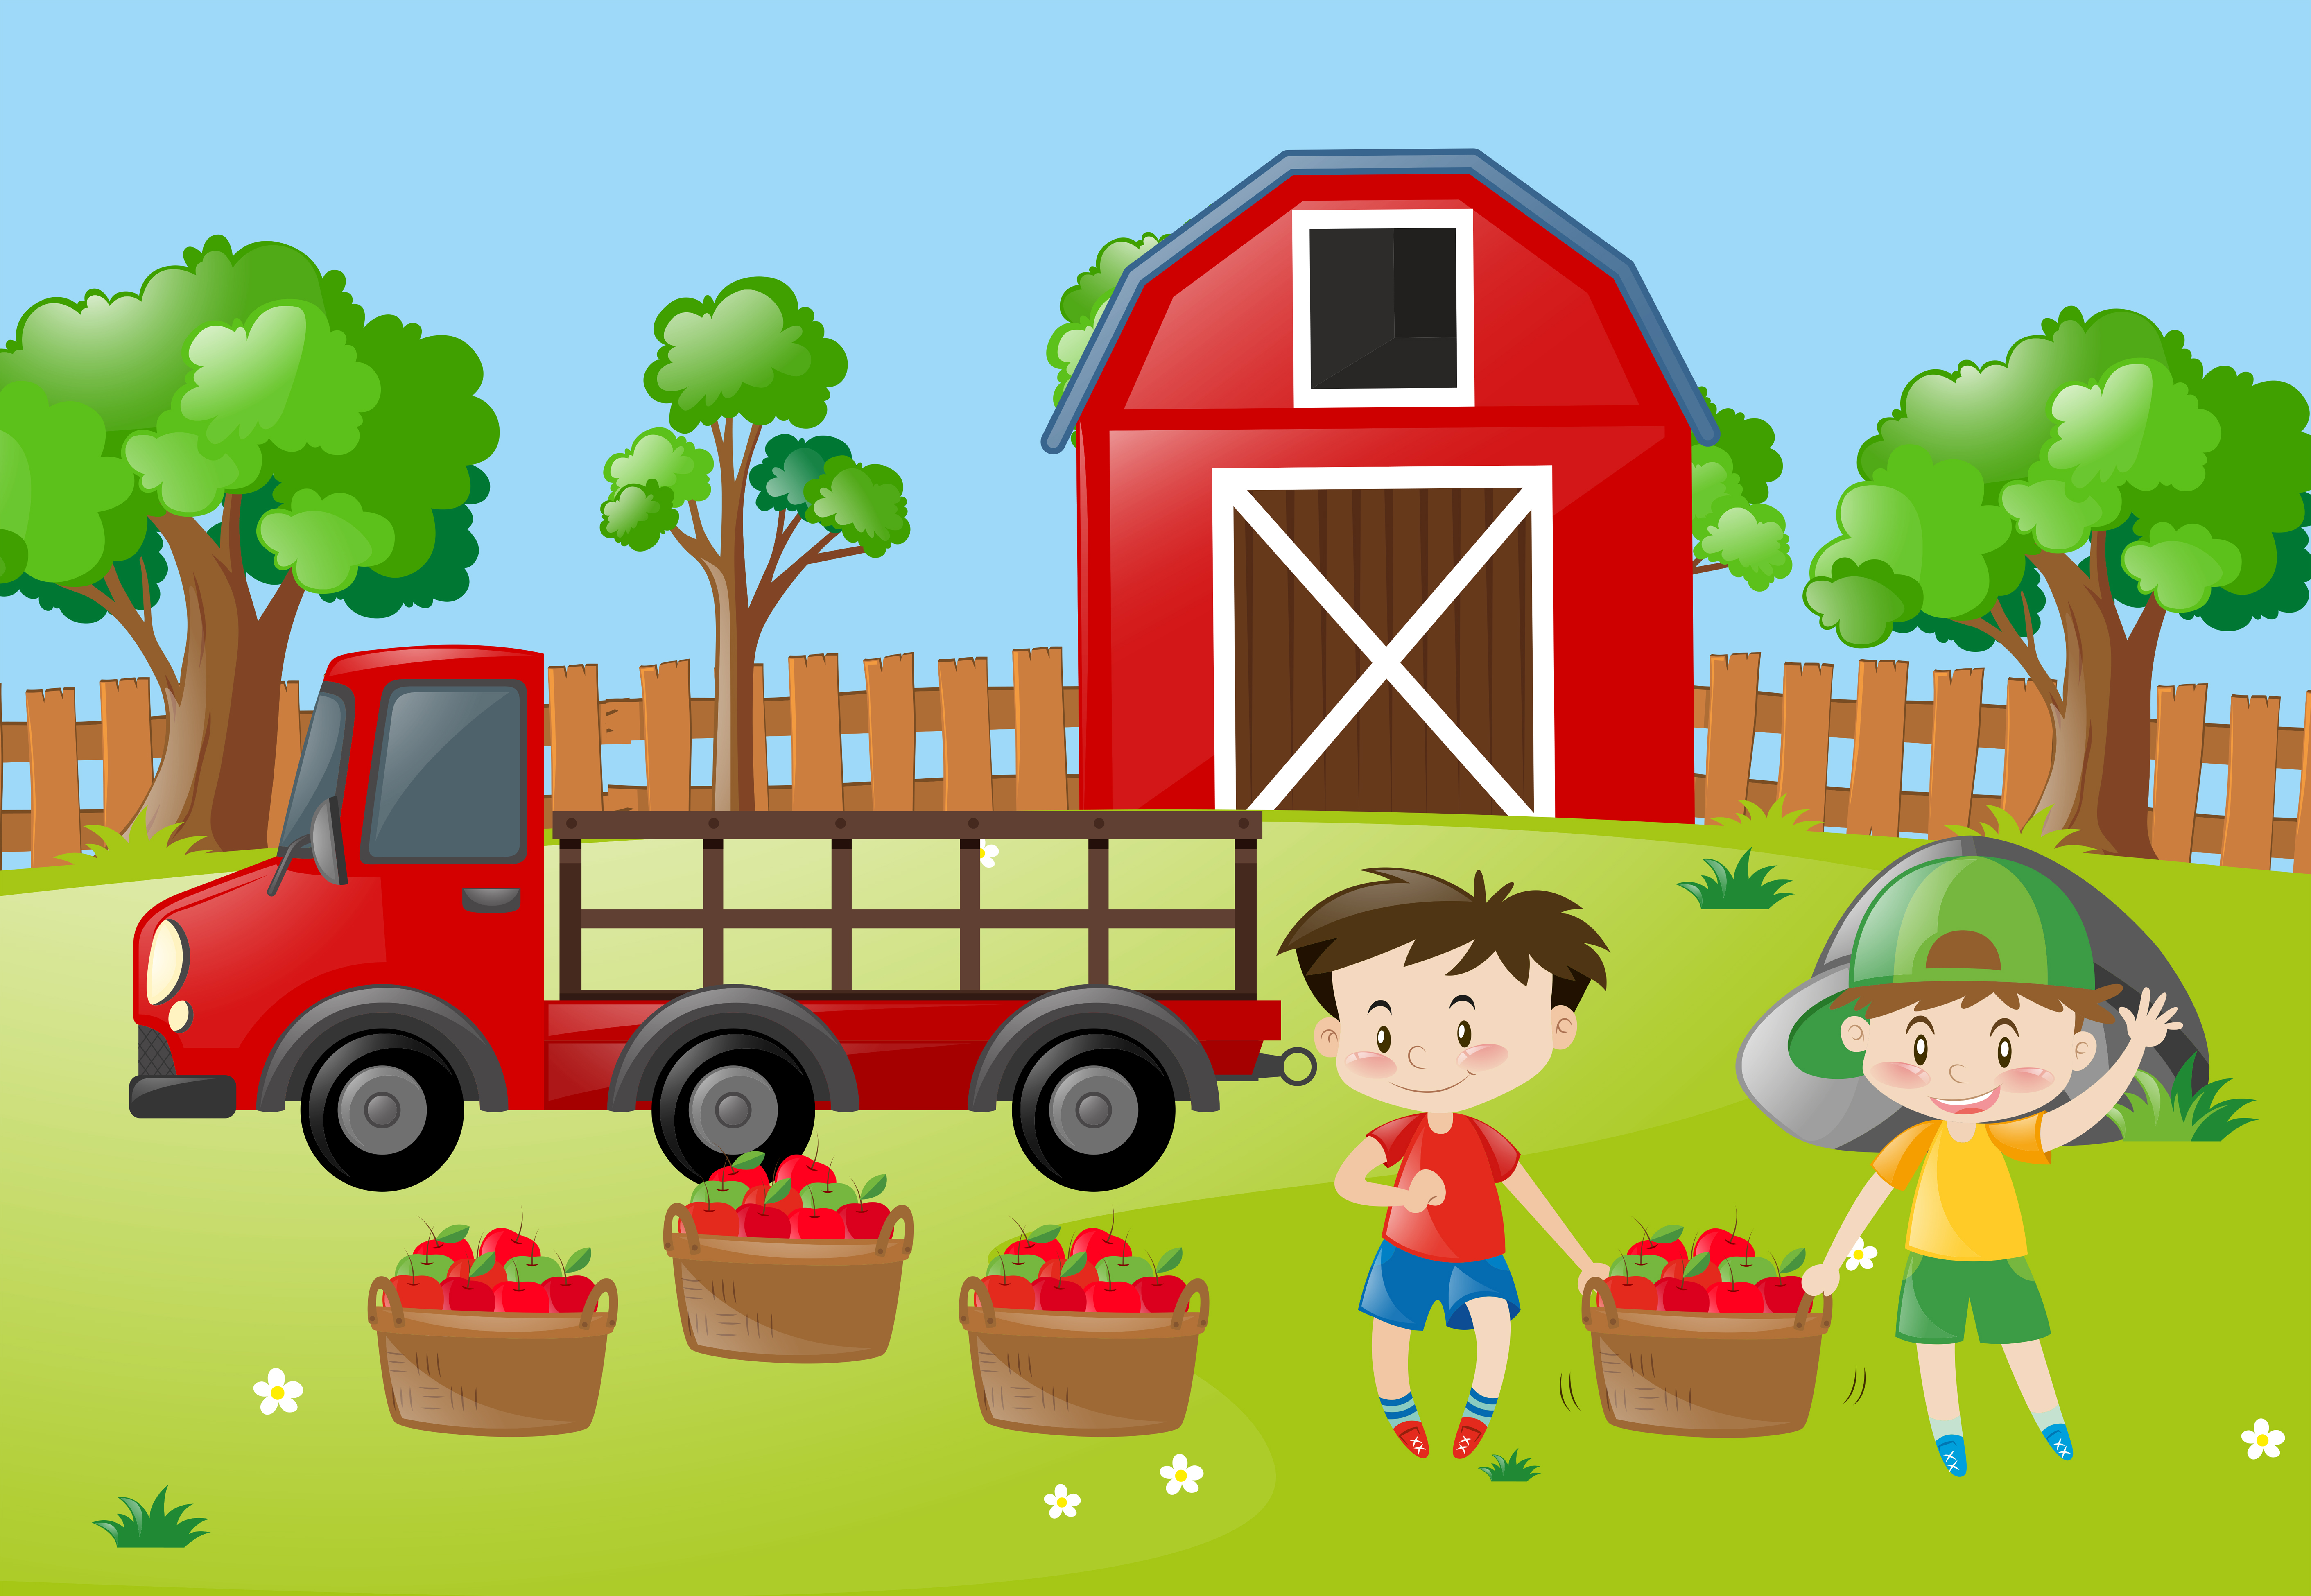 Download Farm scene with two boys with apples in basket 413136 ...